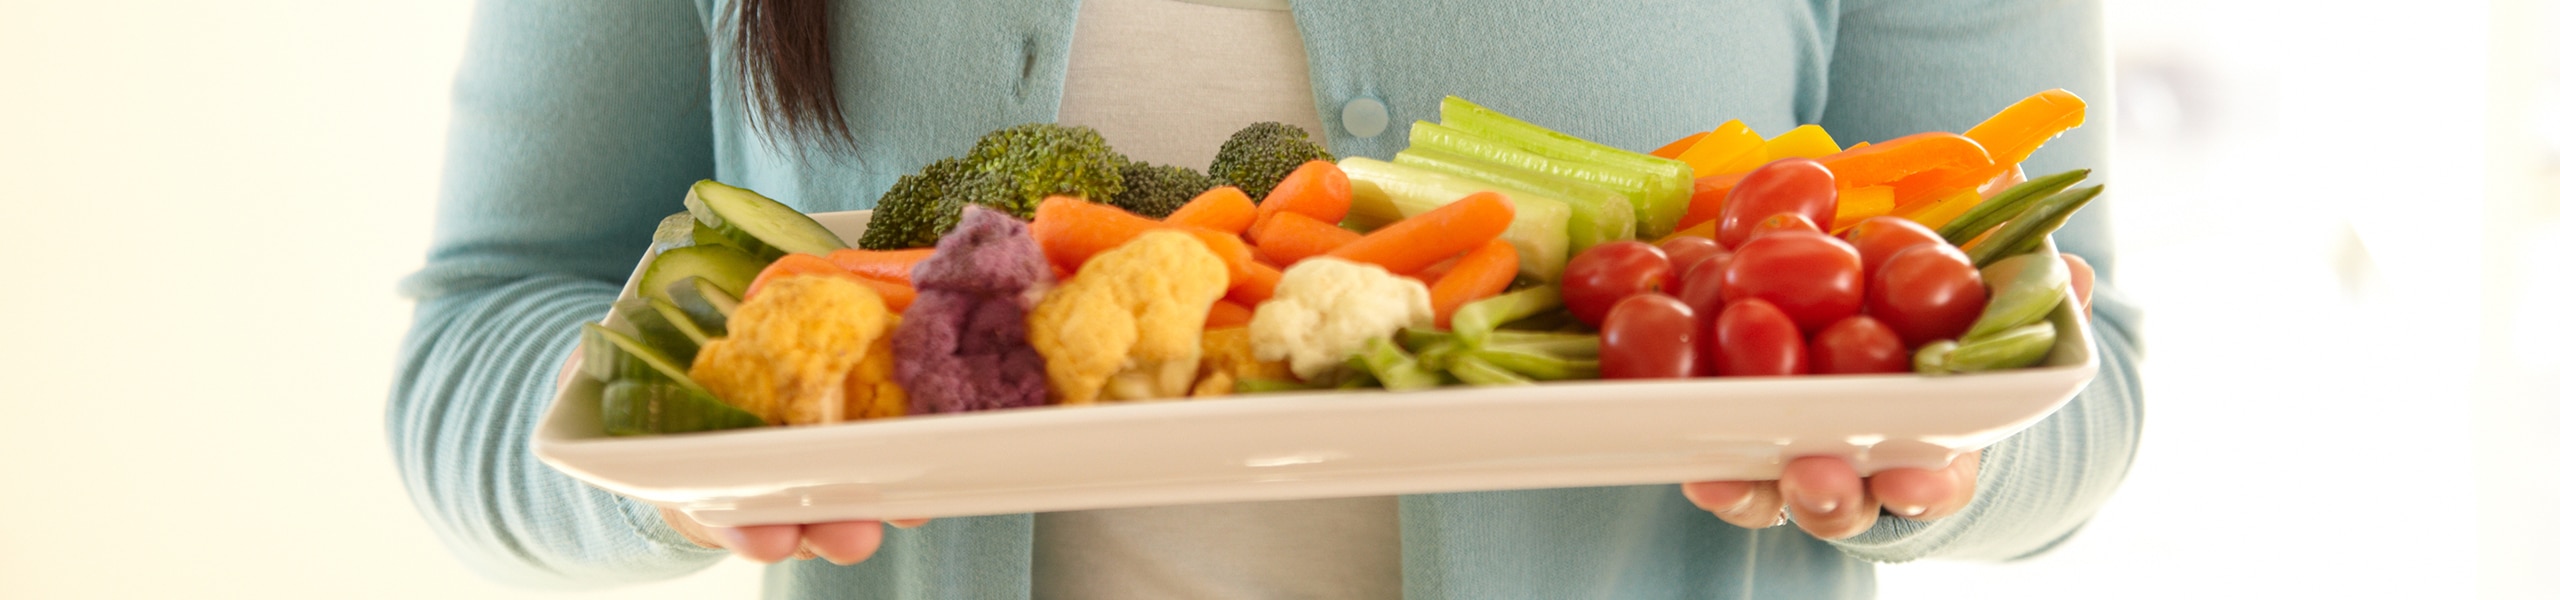 Person holding a platter of assorted raw vegetables